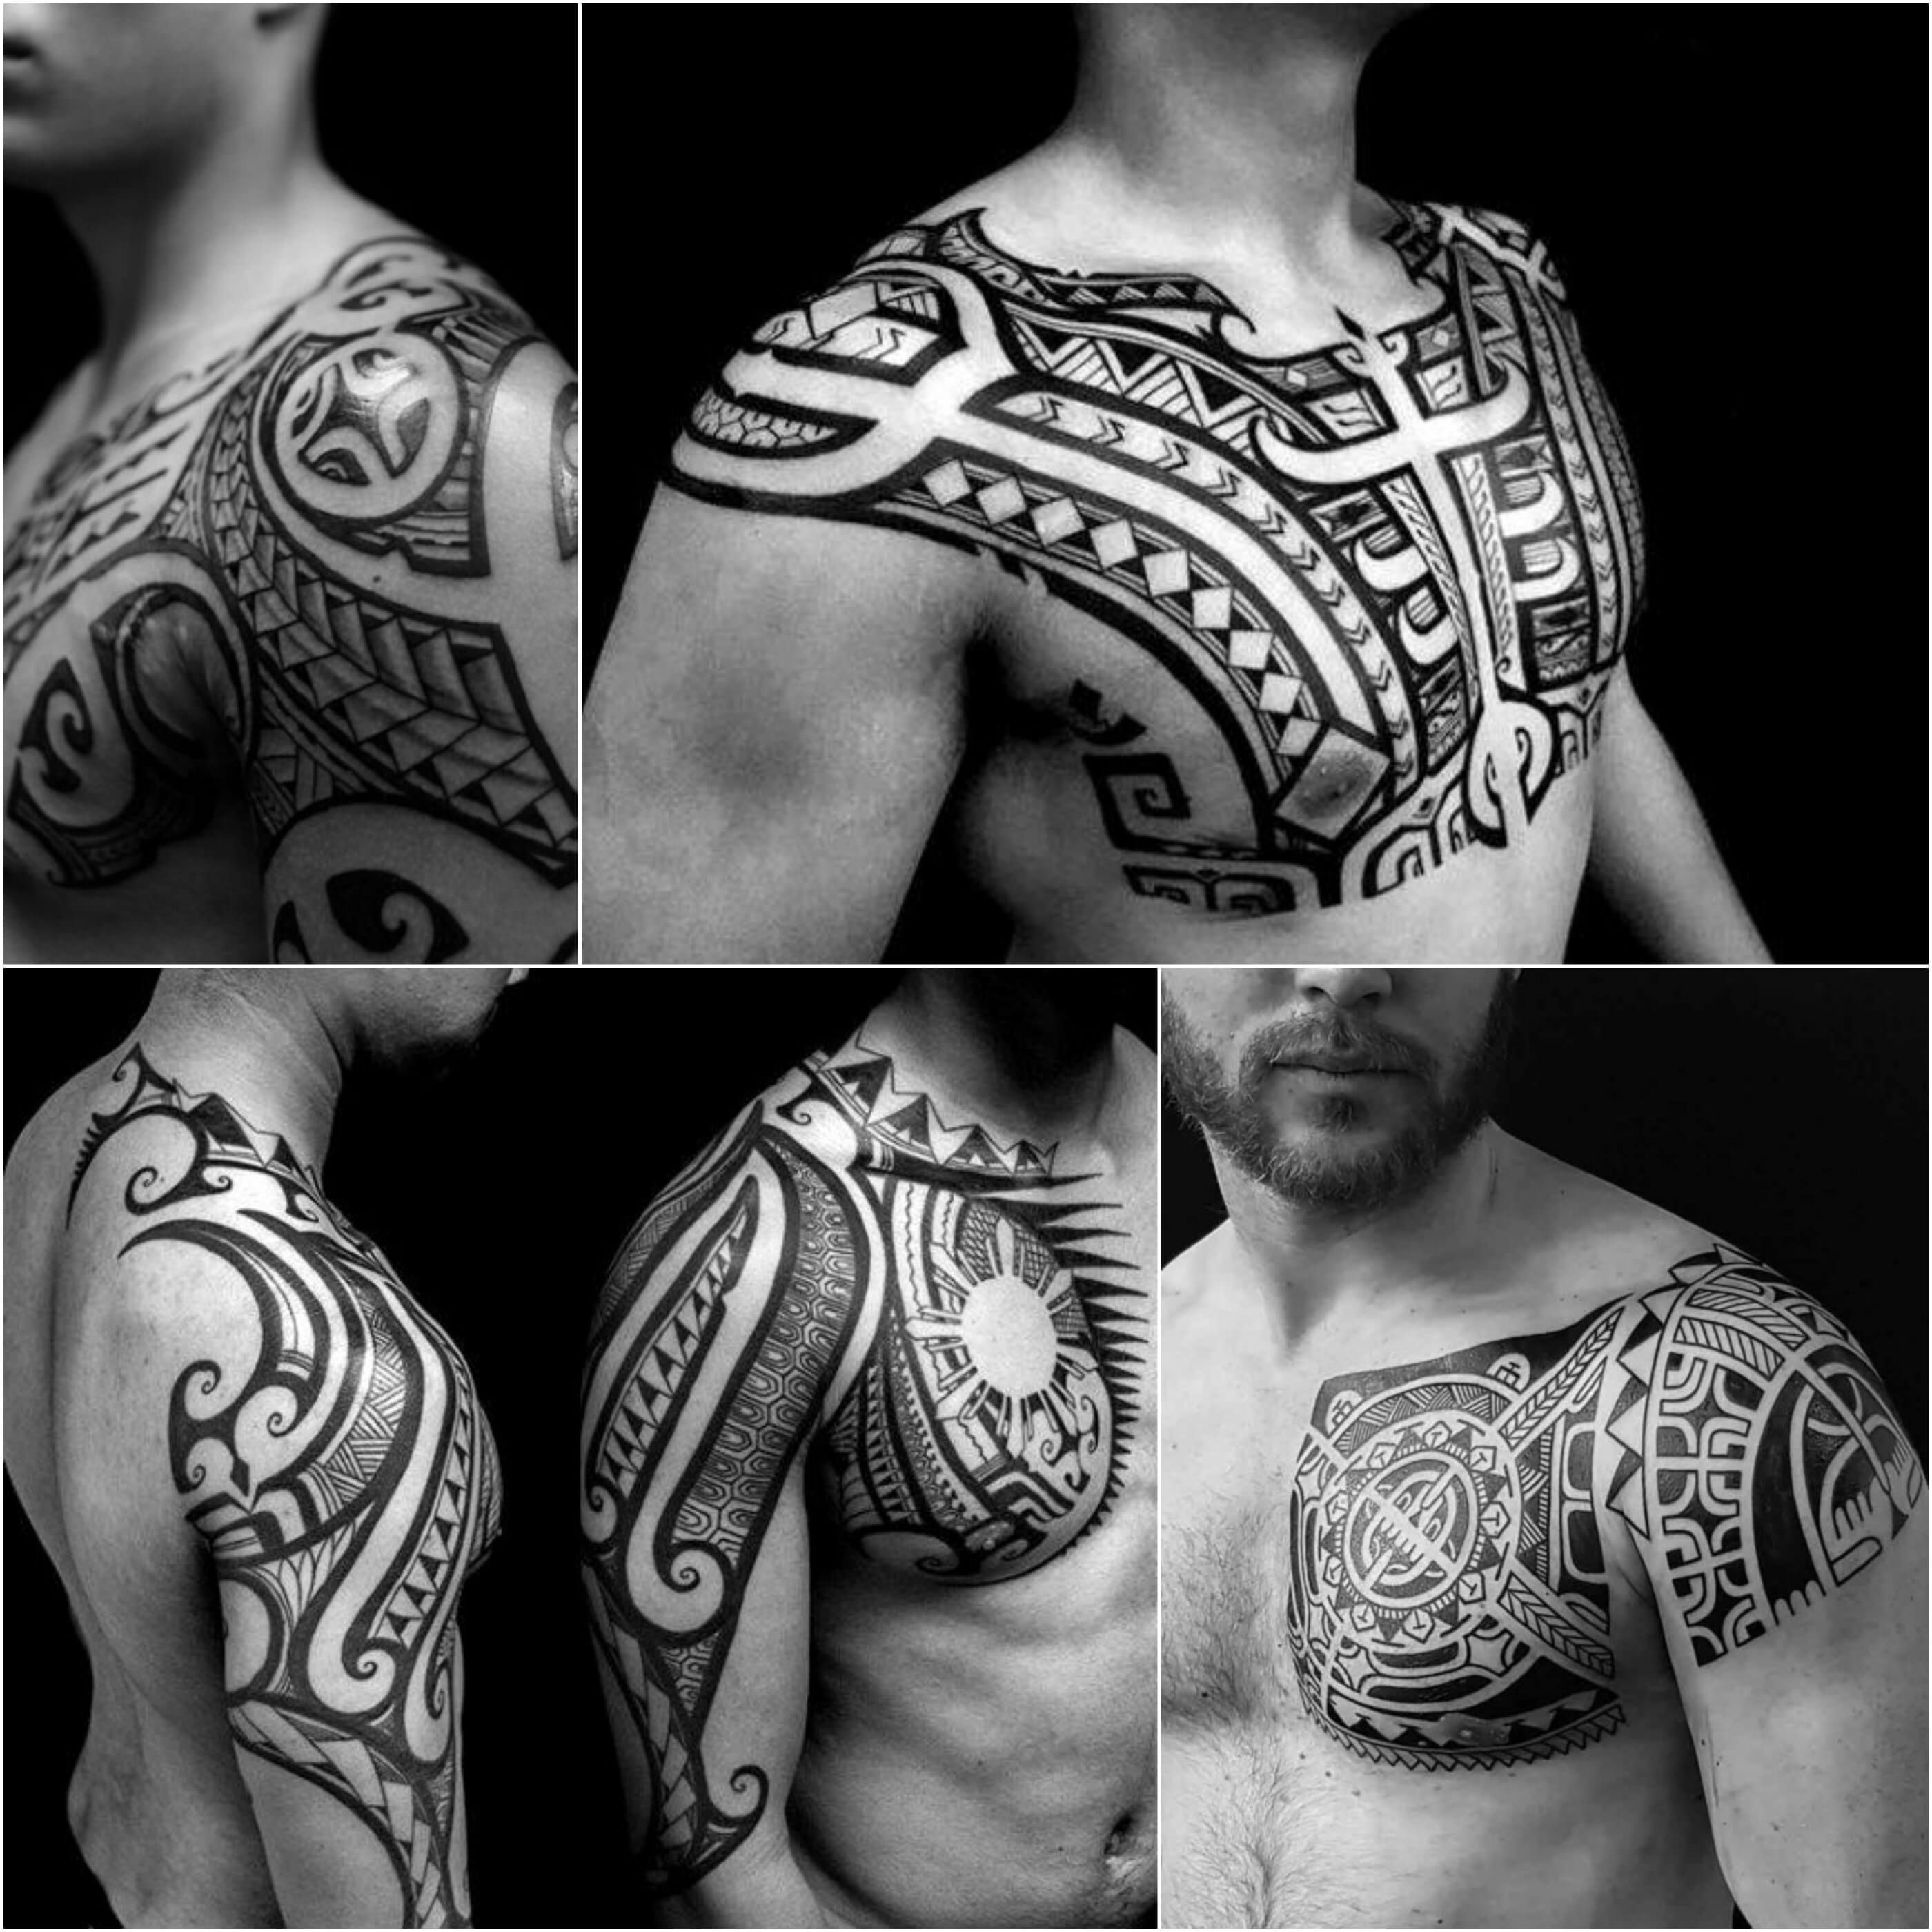 100 Best Chest Tattoos For Men Chest Tattoo Gallery For Men within dimensions 2800 X 2800